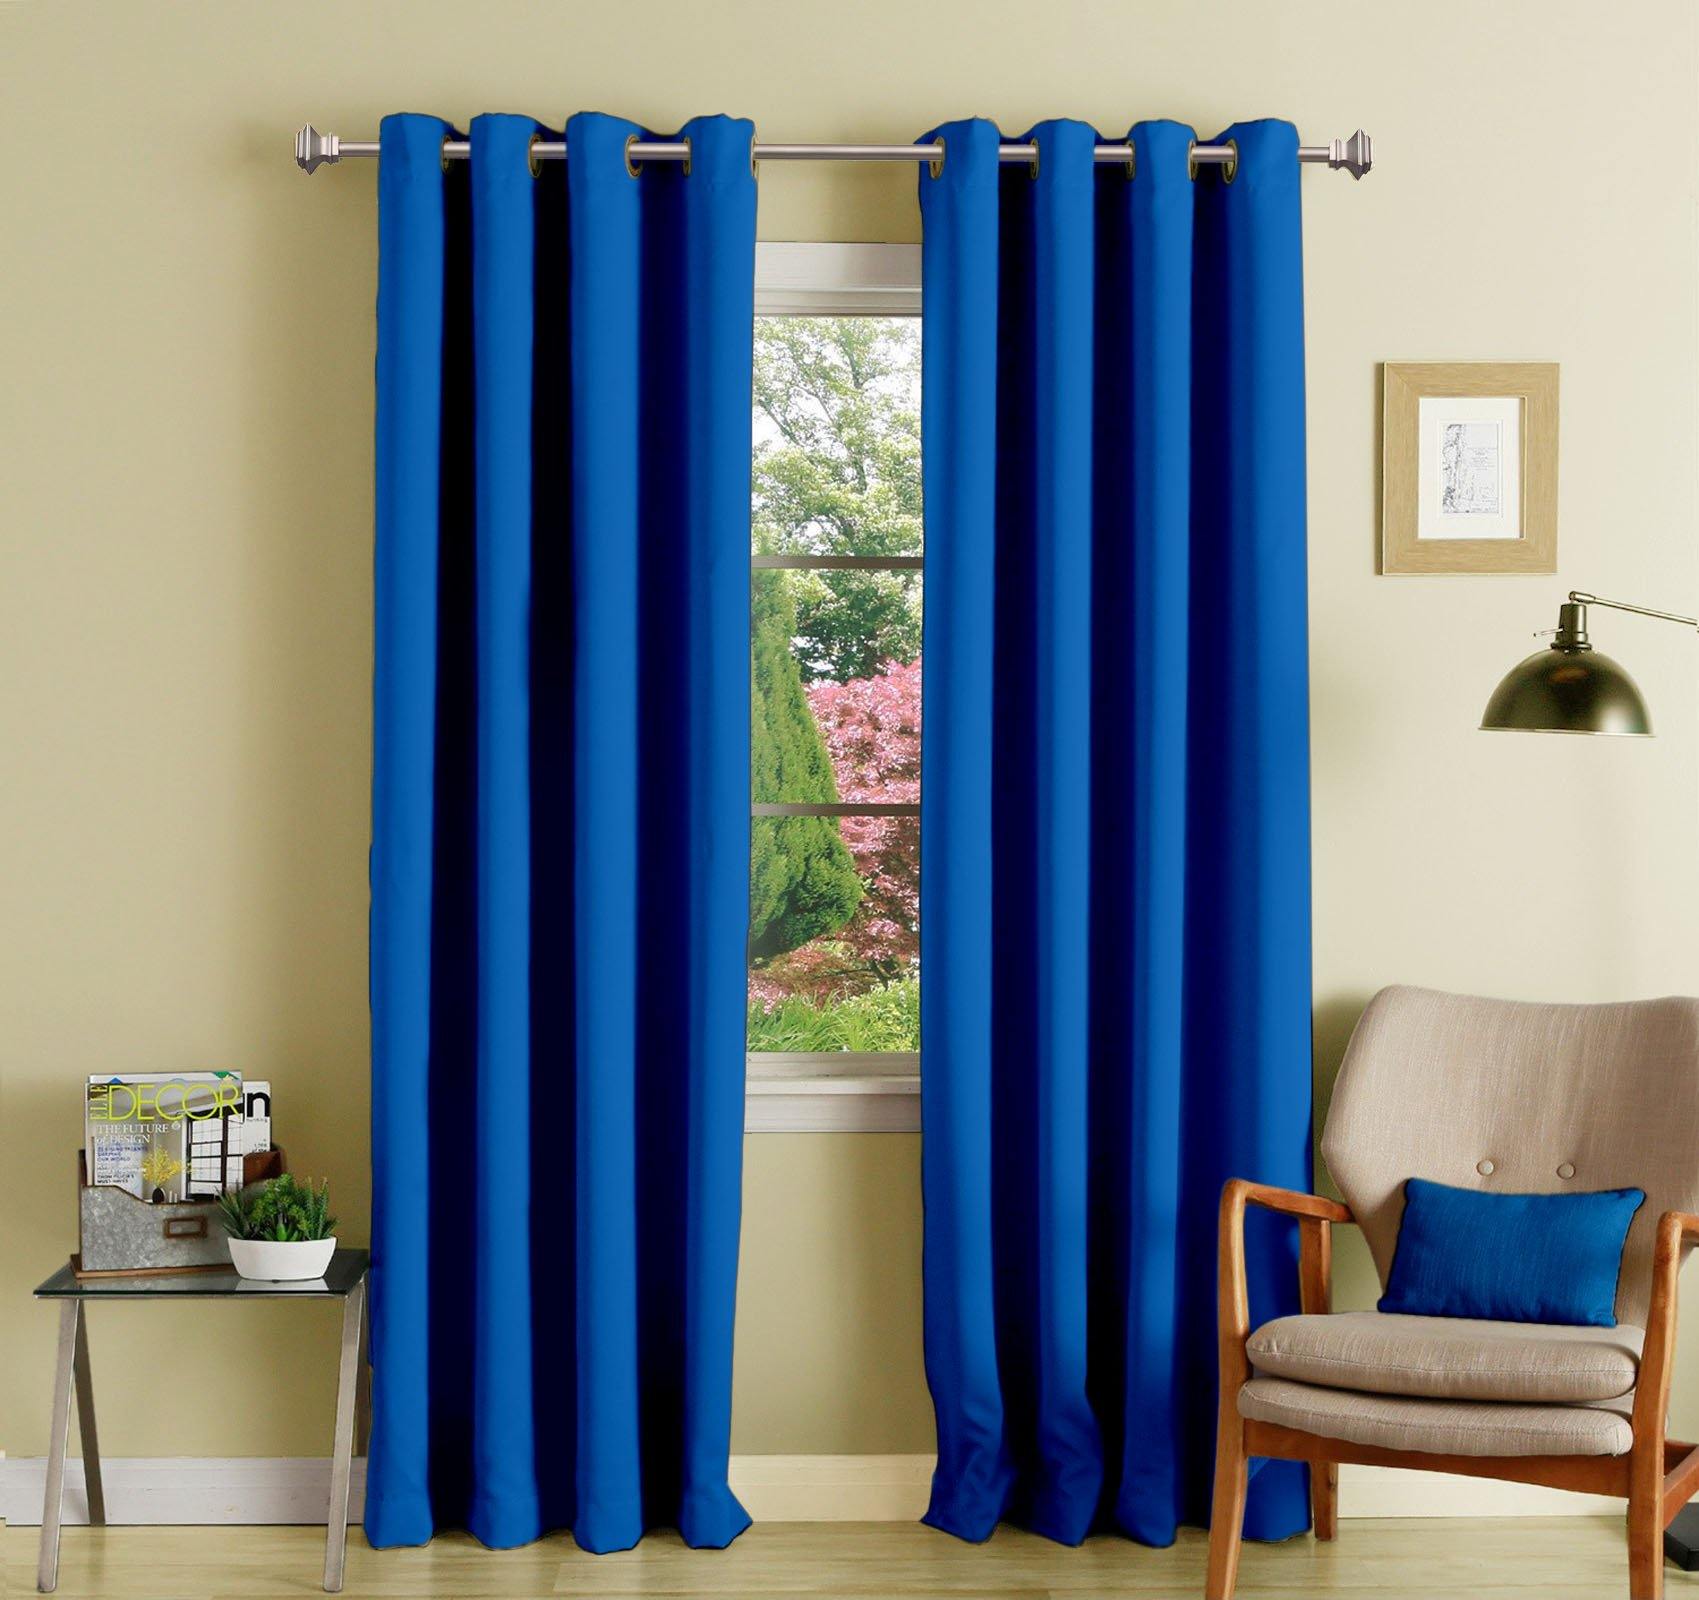 Lushomes Fire Blue Polyester Blackout Curtains with 8 Eyelets for Door - Lushomes